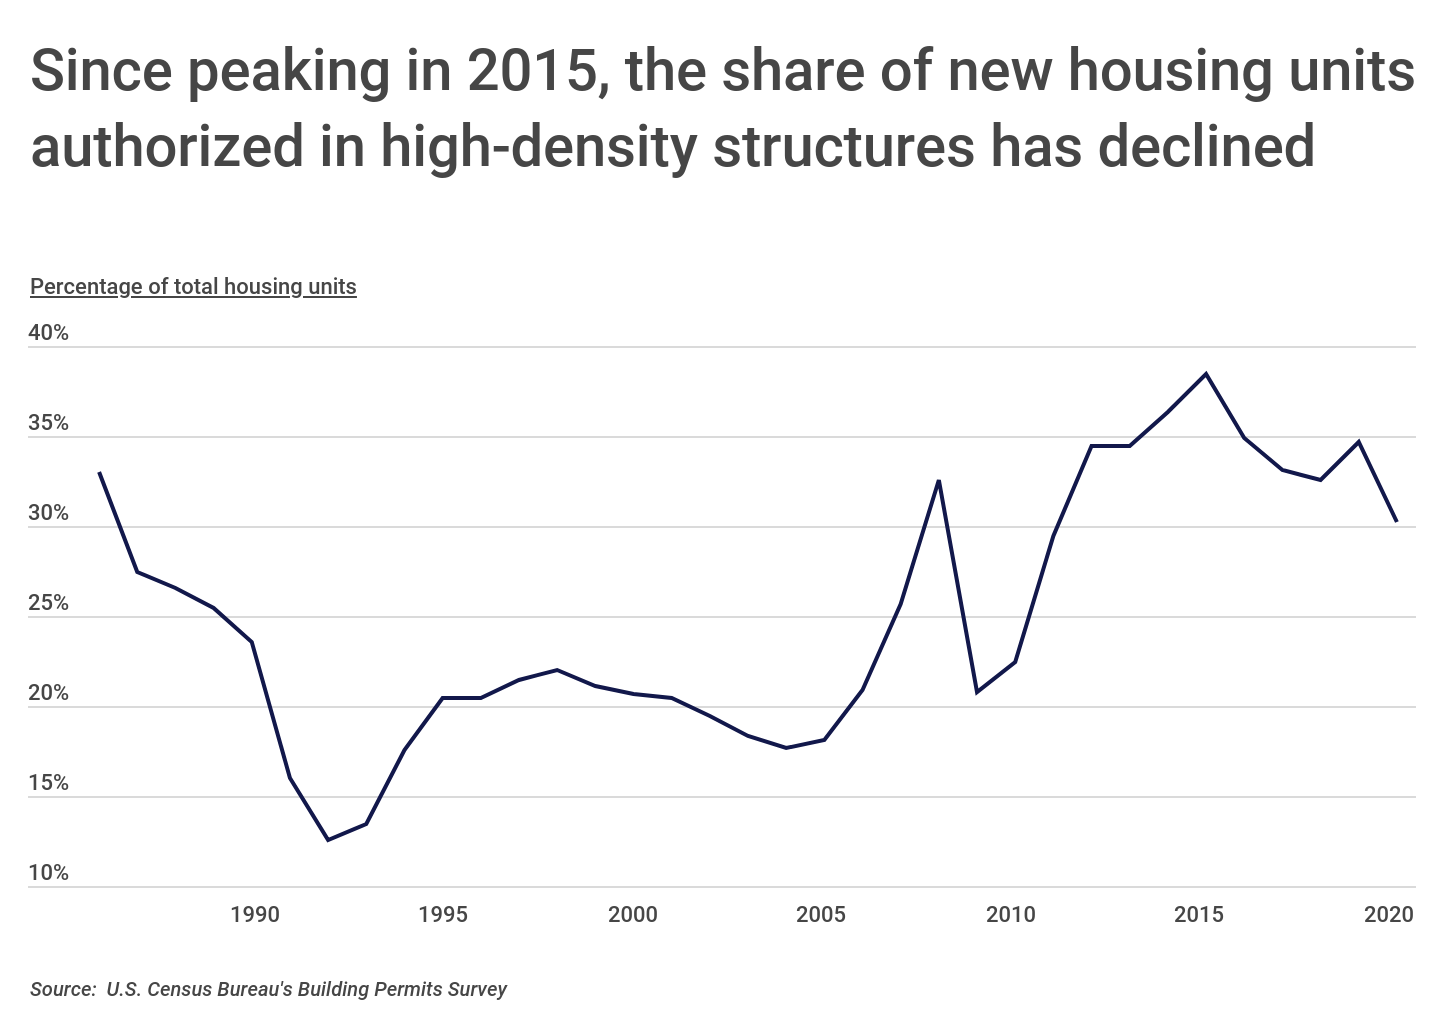 Chart1_Share of new housing units in high-density structures has declined